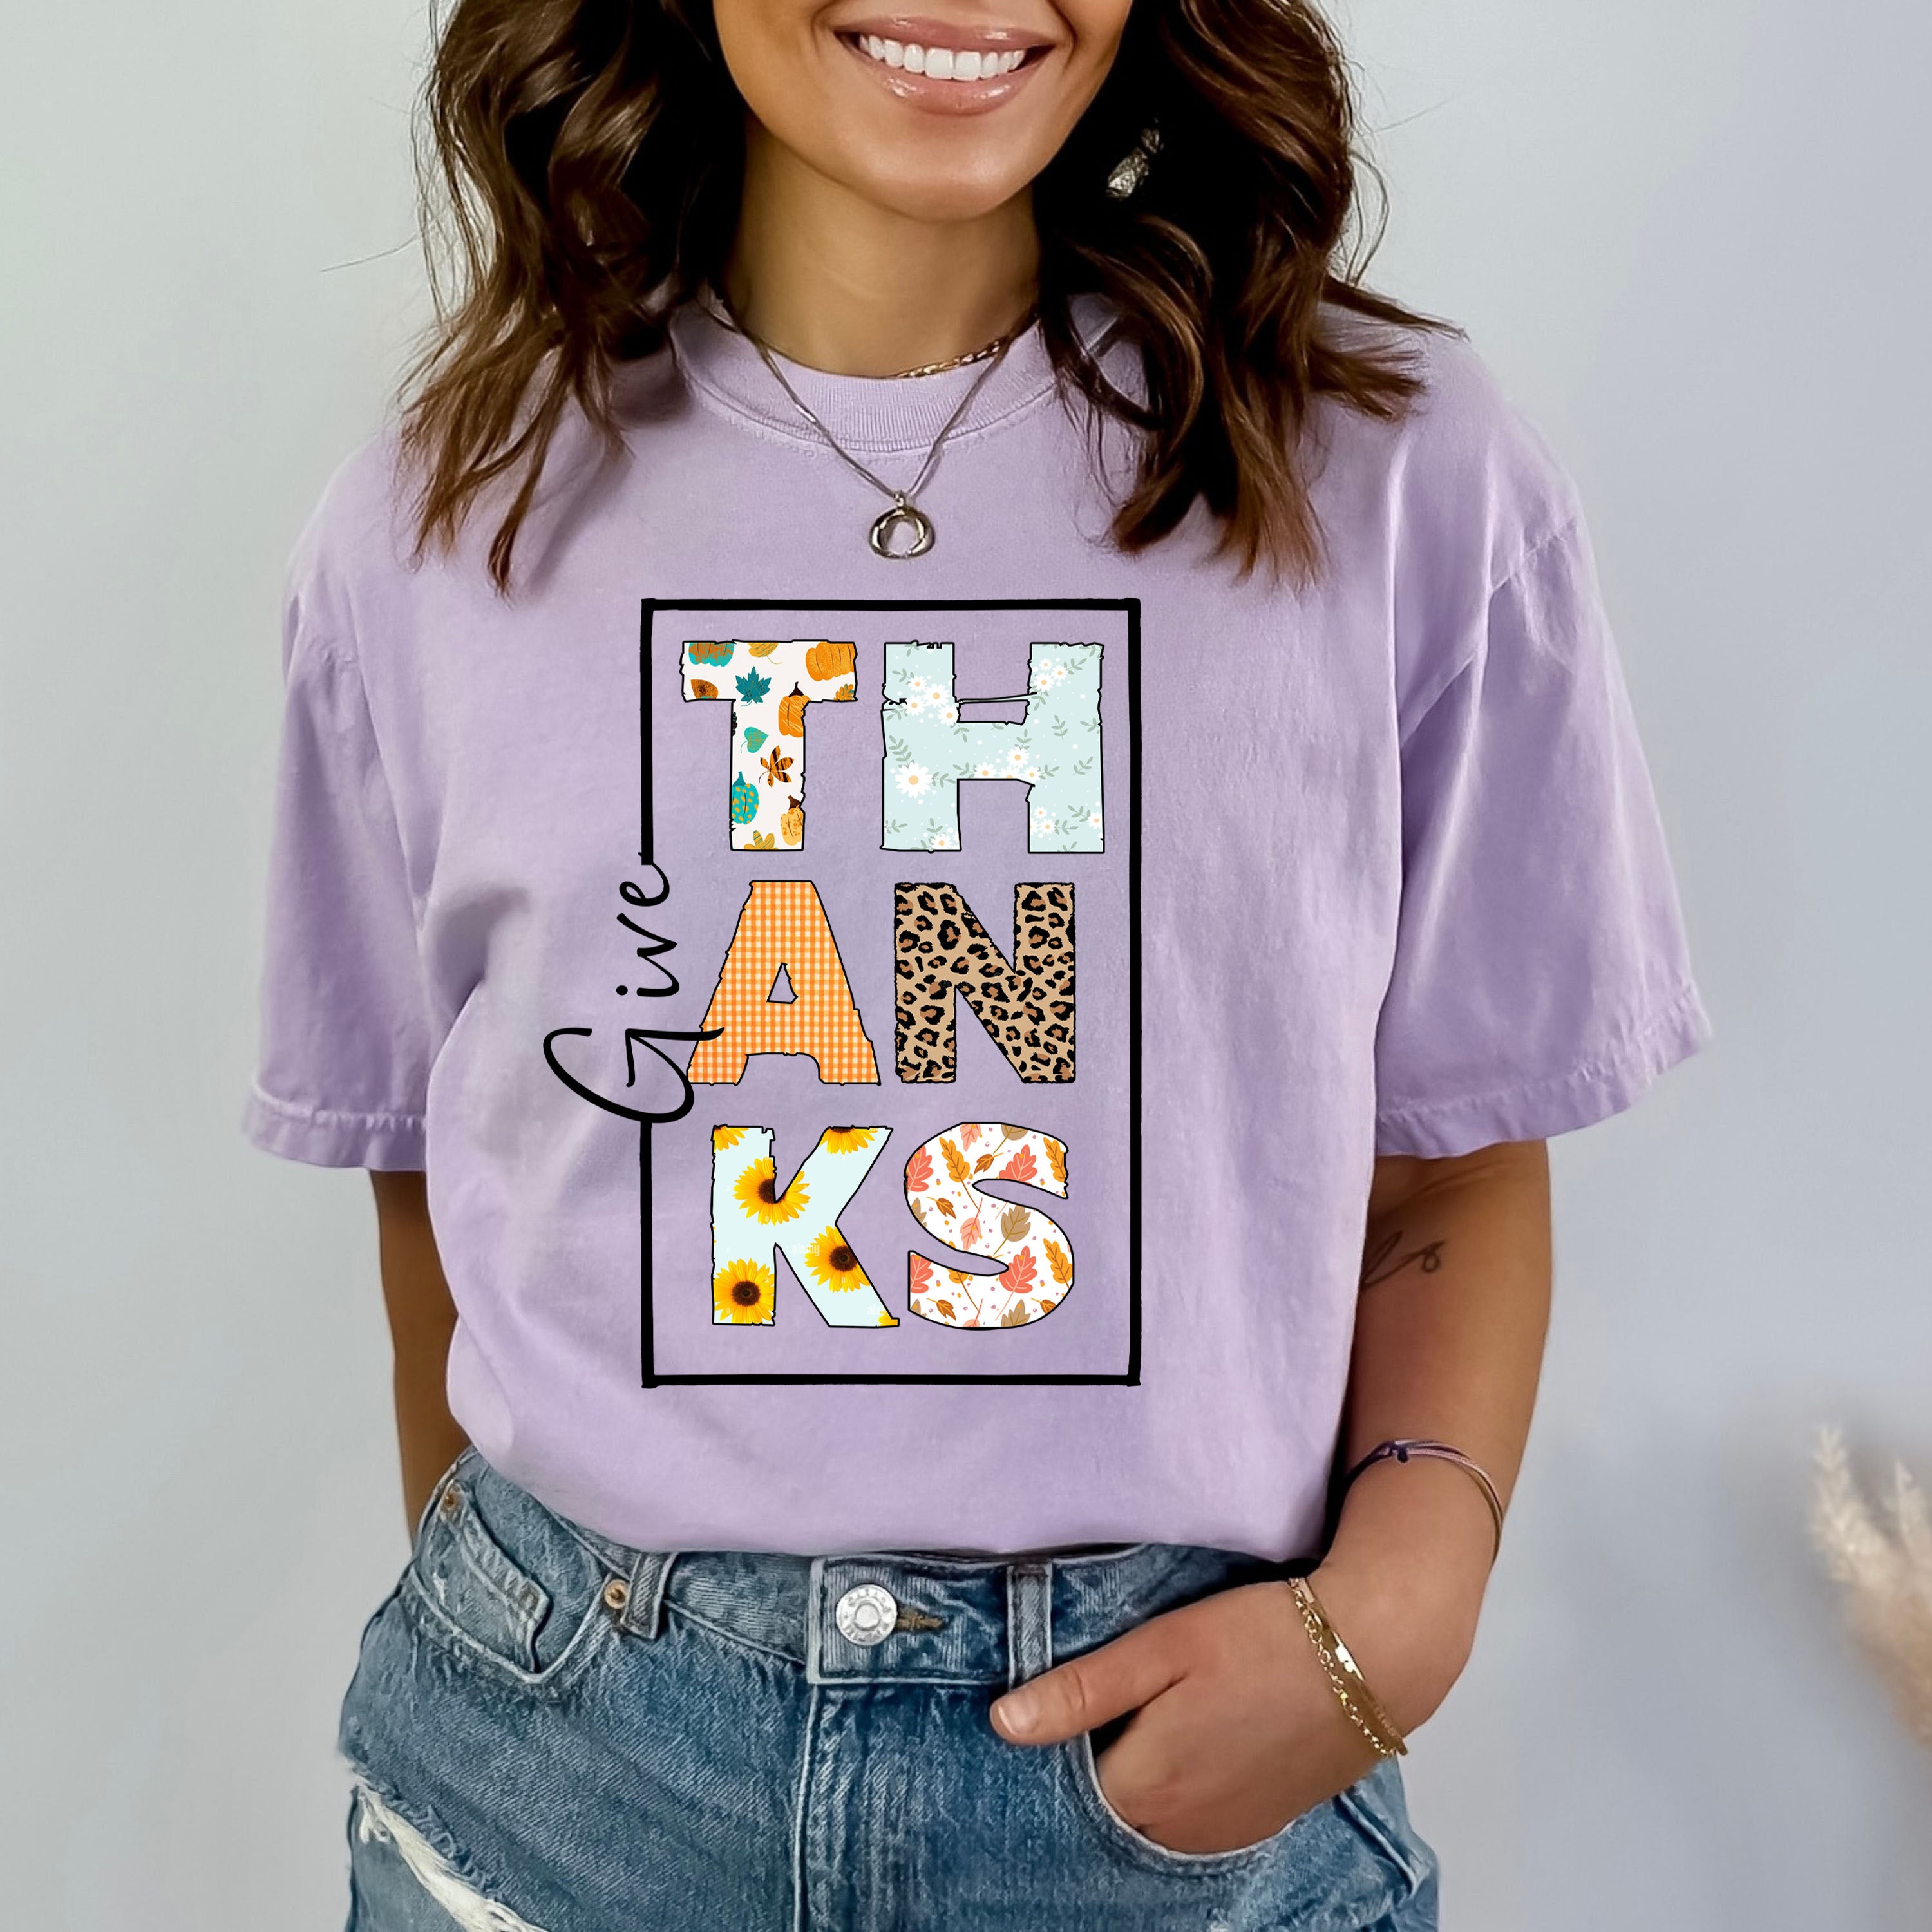 Give Thanks - Bella Canvas